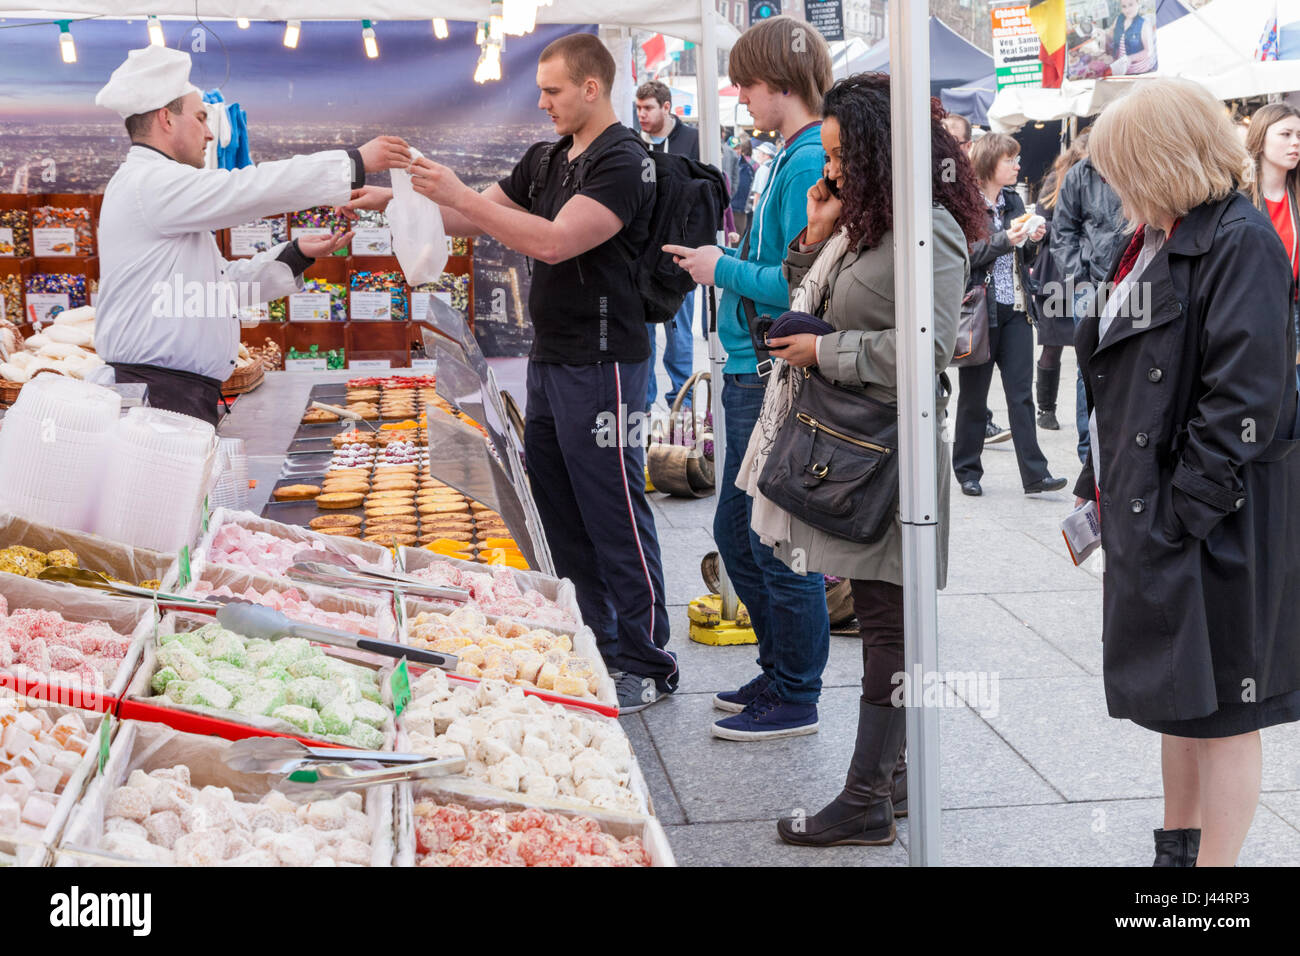 Selling sweets and pastries at an outdoor market stall, Nottingham, England, UK Stock Photo